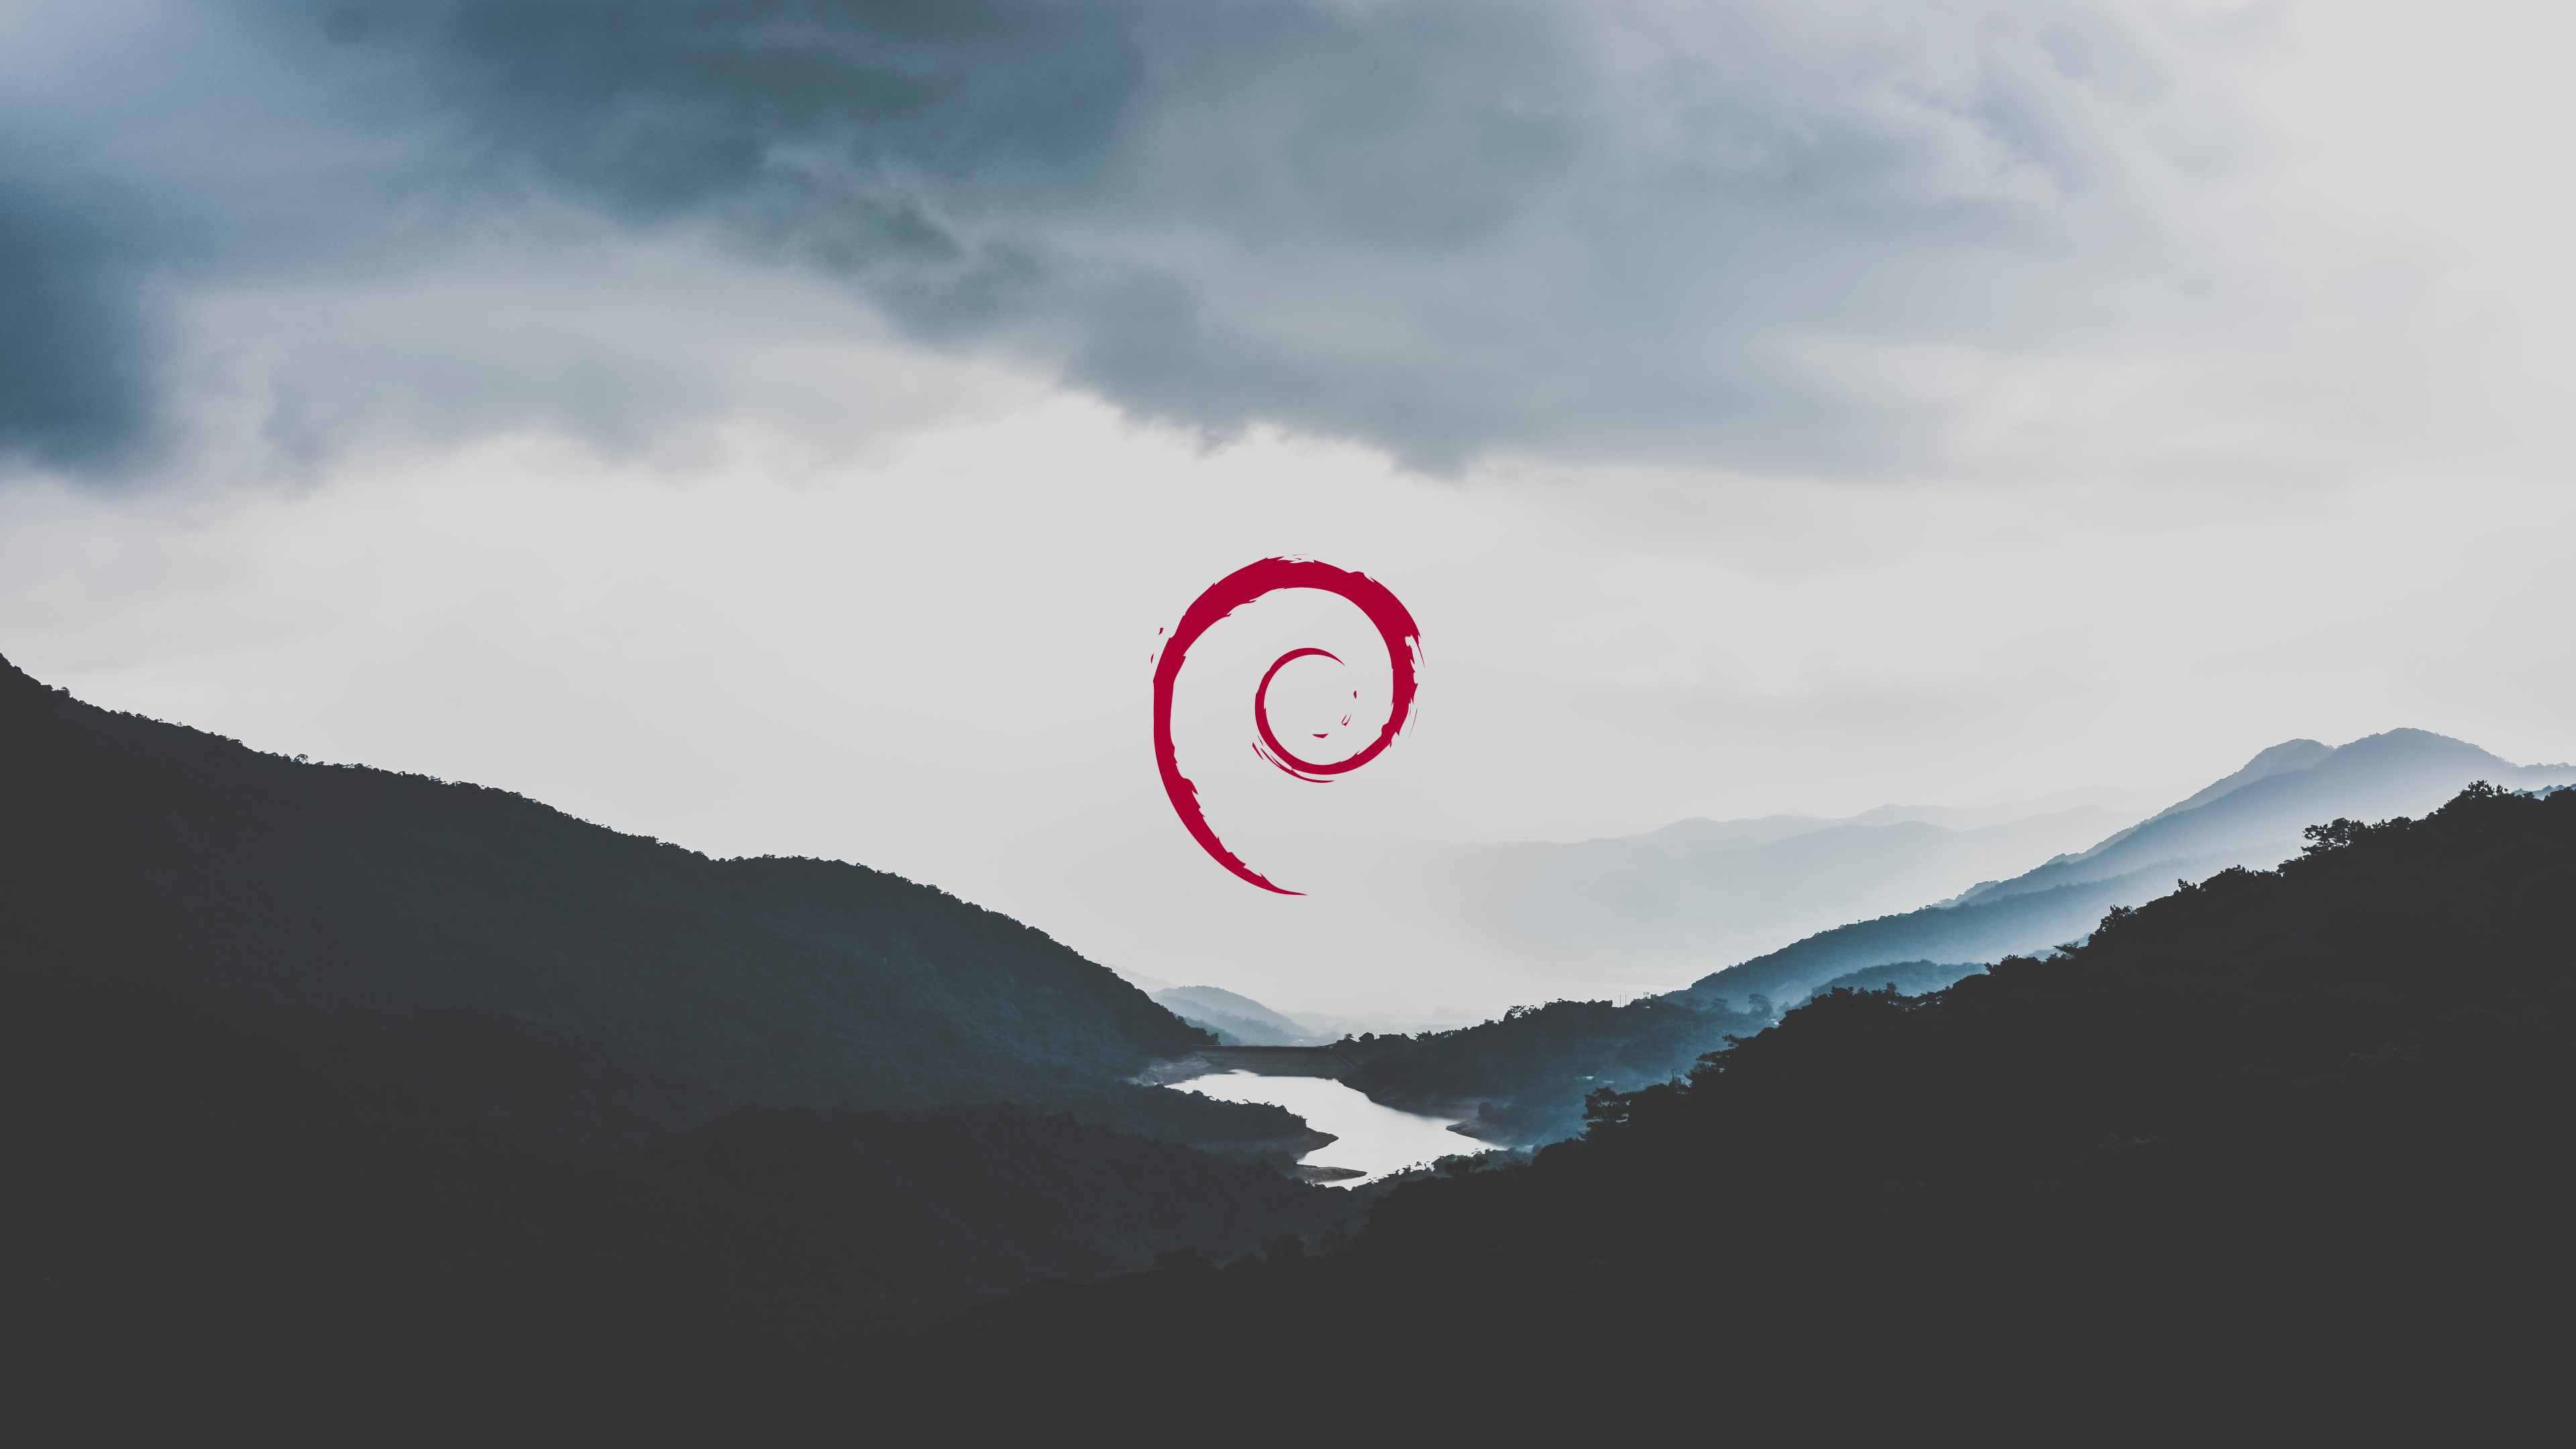 Debian Linux Mountains River Forest Nature 3840x2160